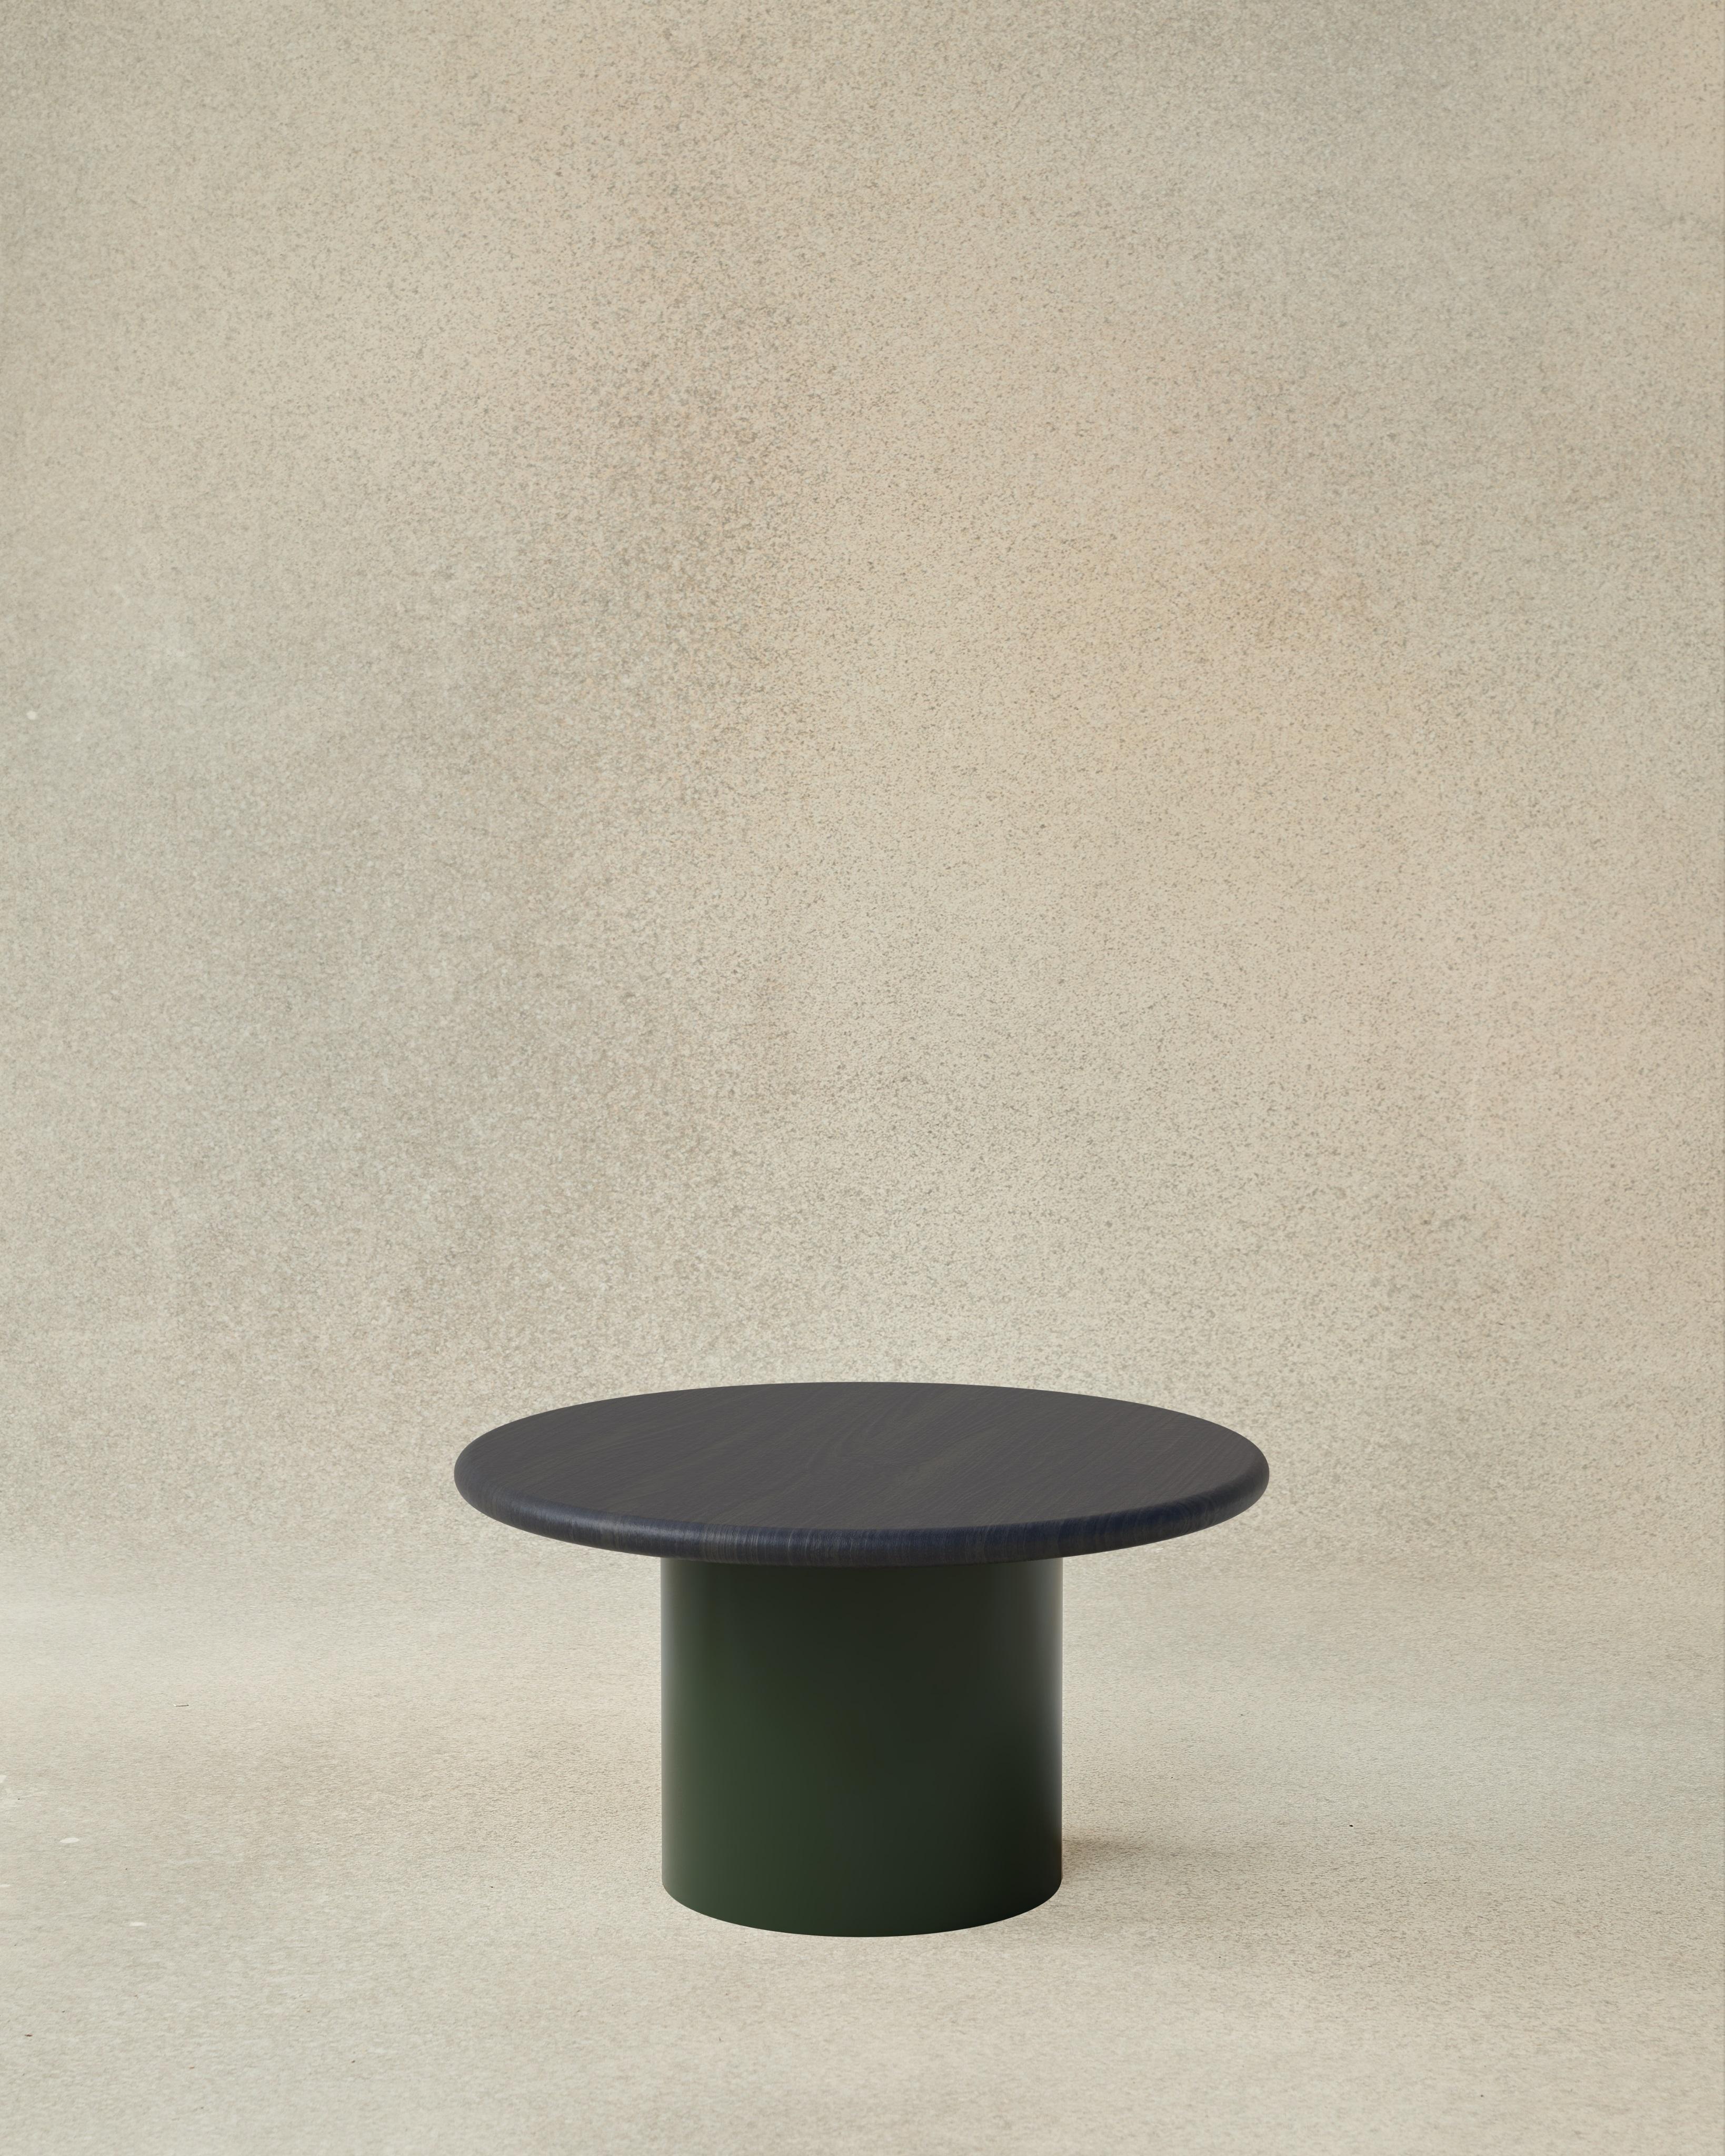 The Raindrop 600 is a mid sized Raindrop, falling within the coffee table set but equally a perfectly sized Side Table for your home and now available in a range of finishes to suit any interior or style. The raindrops nestle together to form a